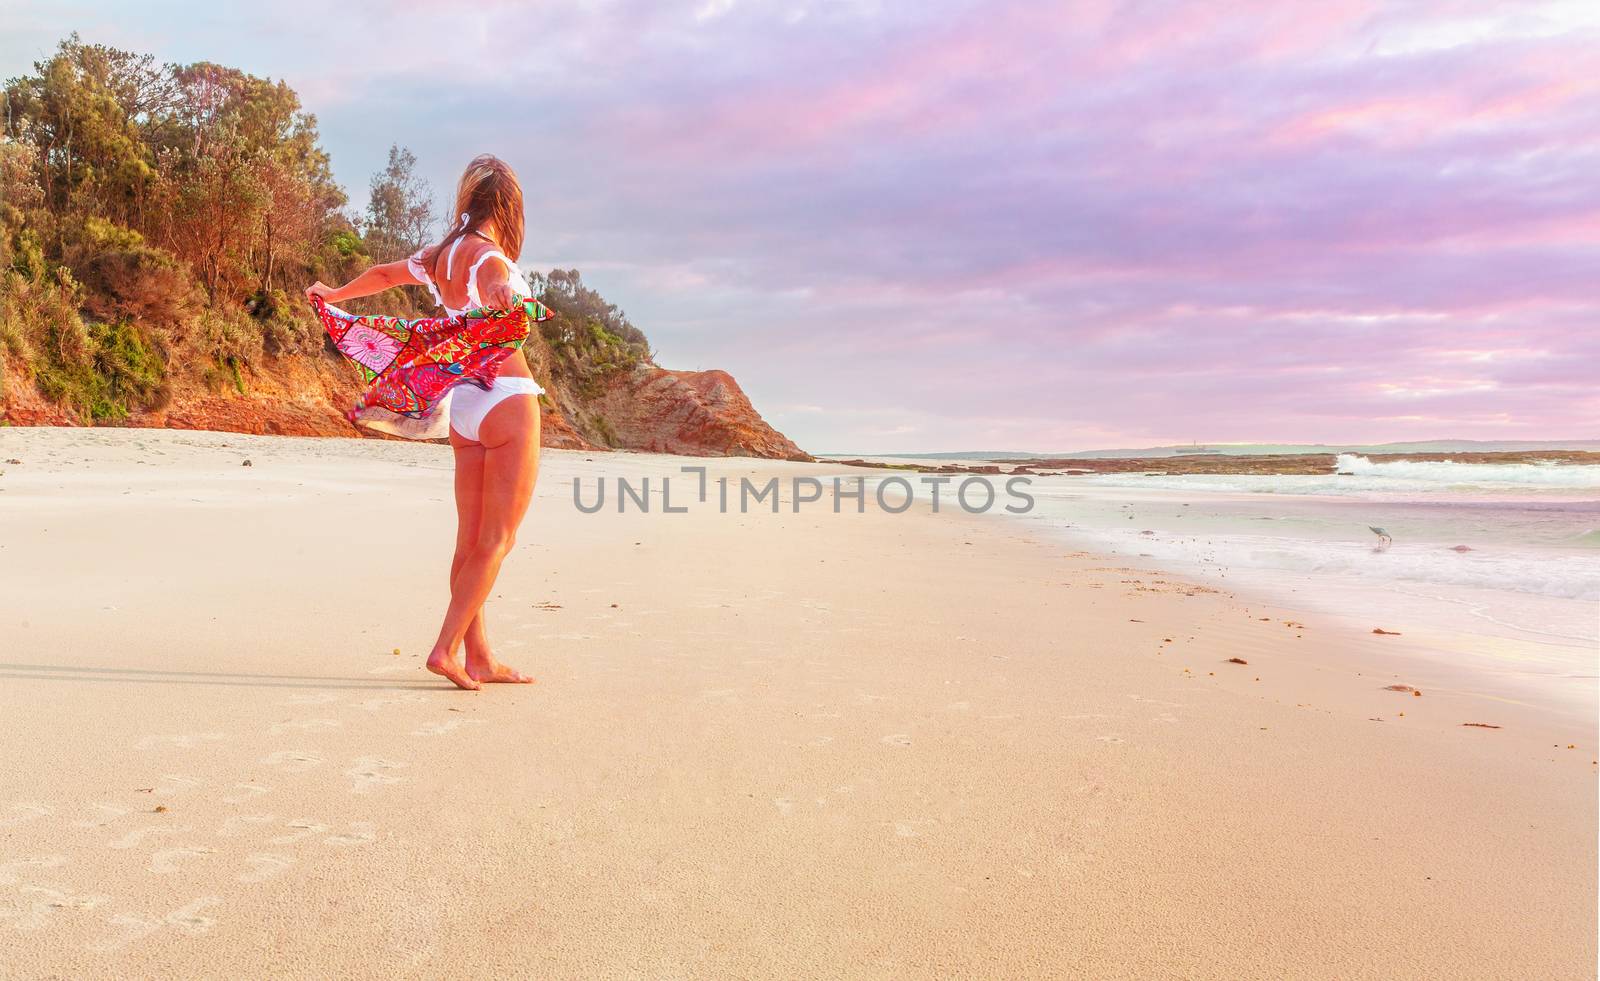 Woman on beach with beach towel flapping behind her by lovleah